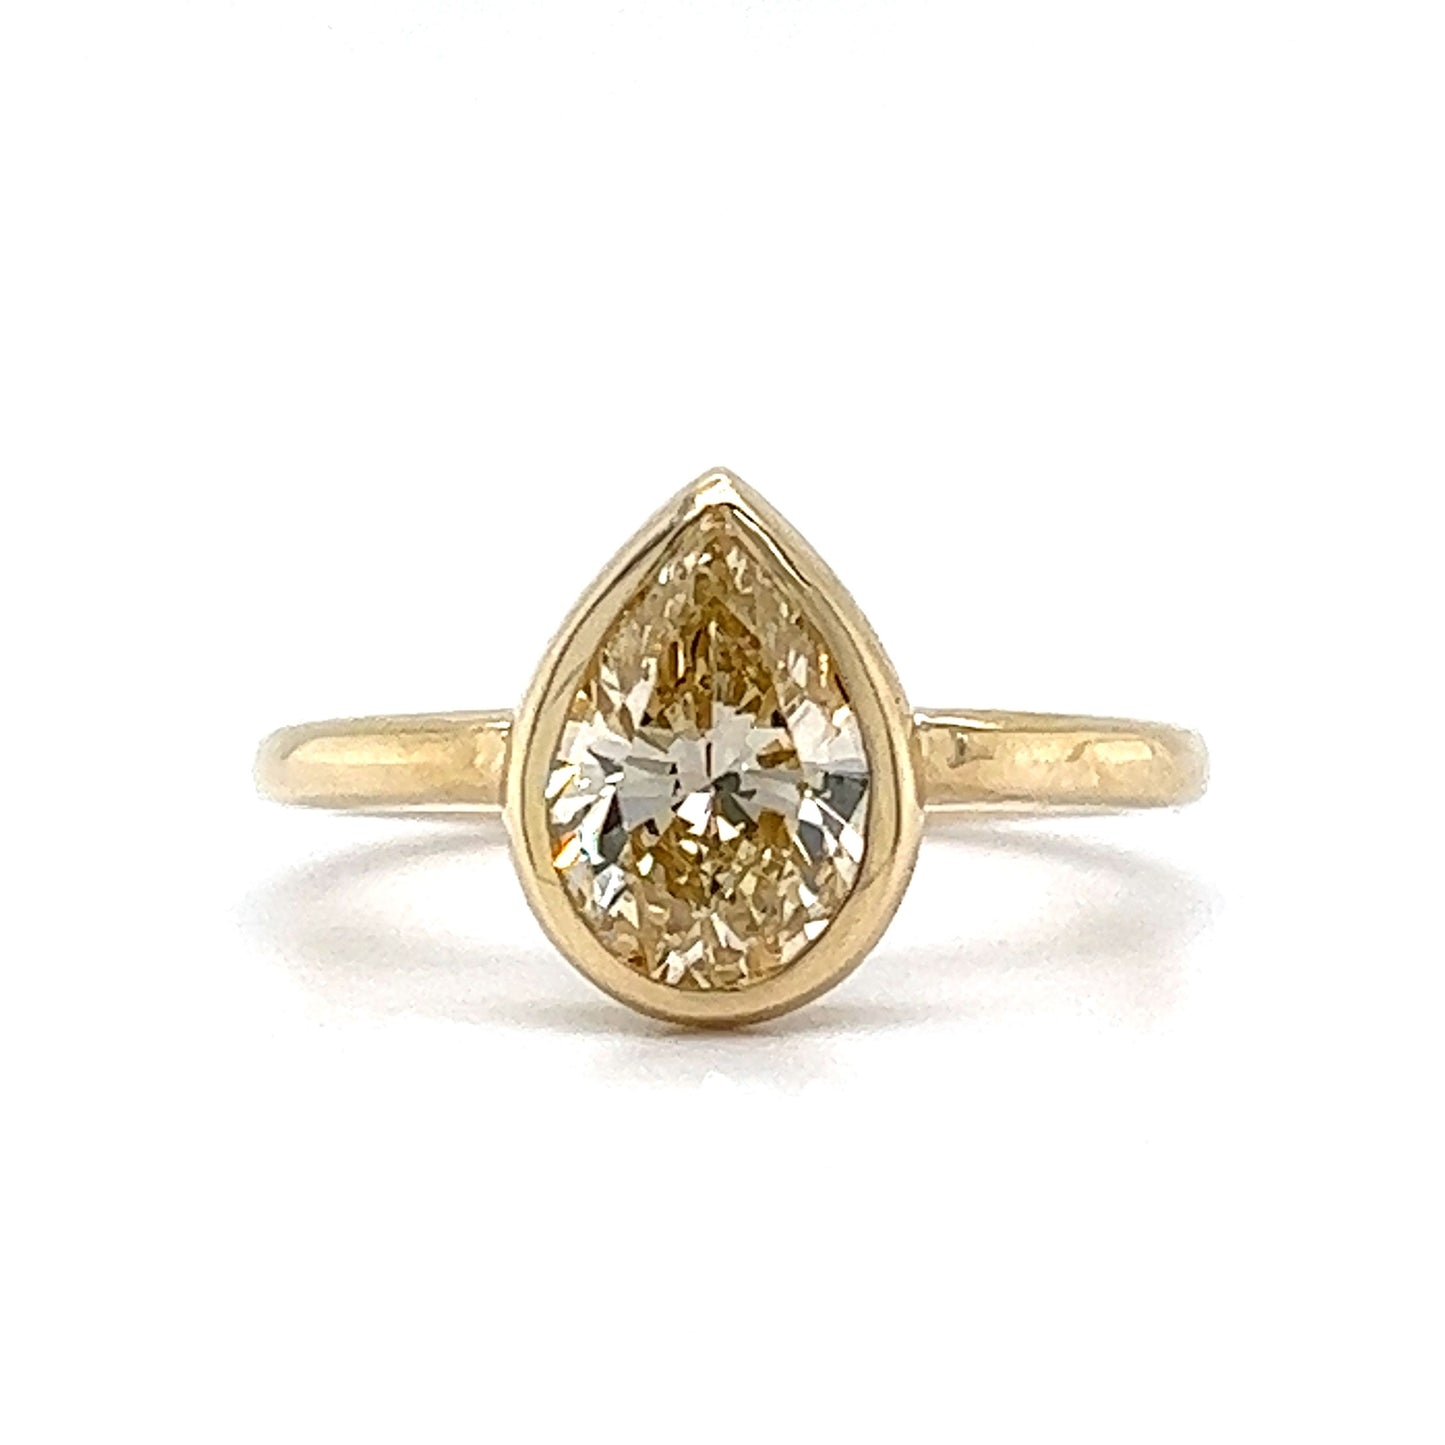 1.51 Light Yellow Pear Cut Diamond Engagement Ring in 14k Yellow Gold